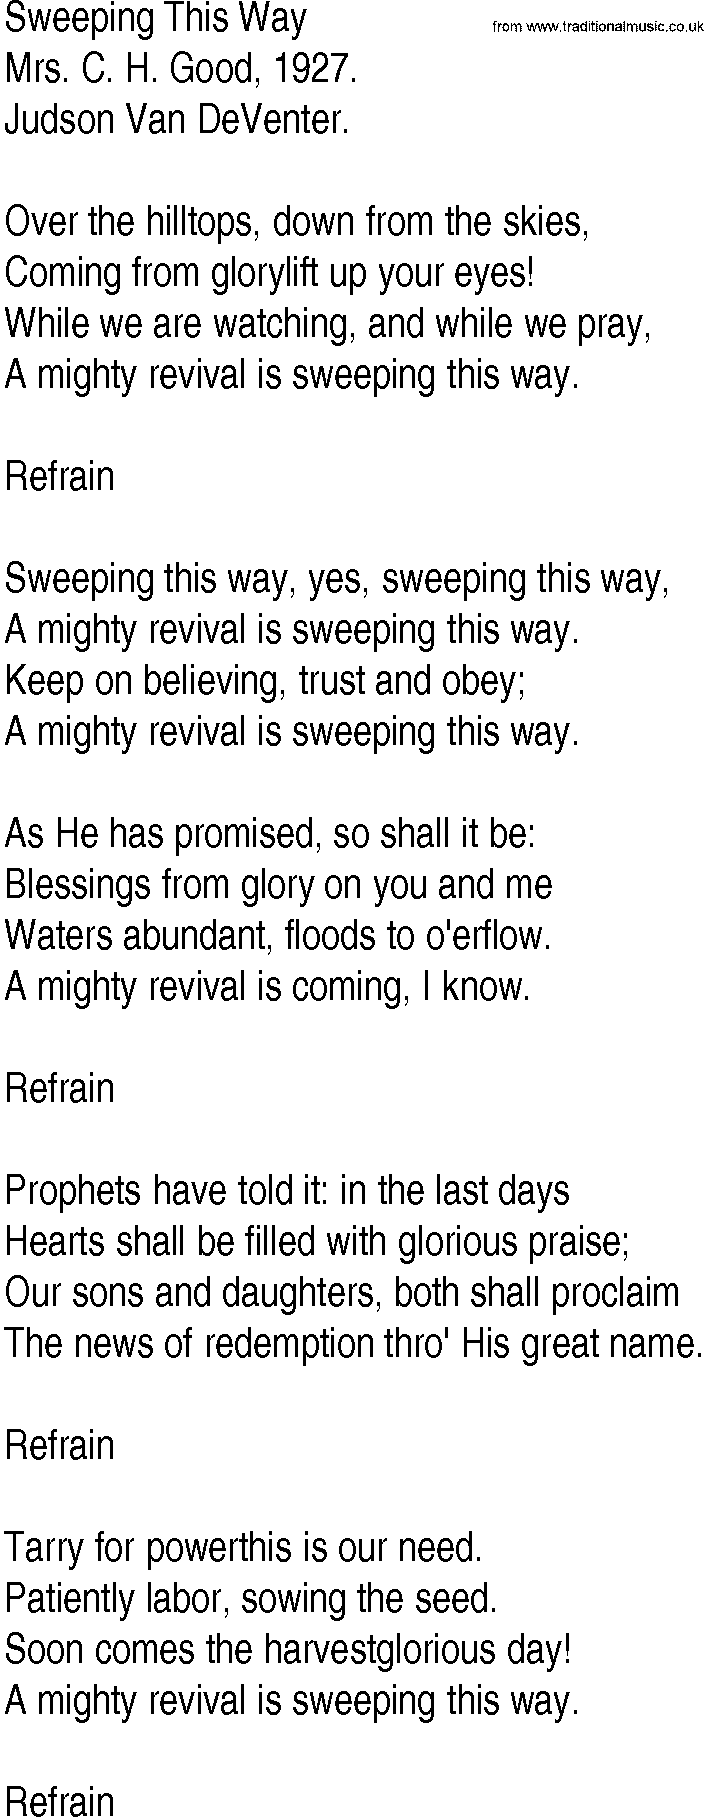 Hymn and Gospel Song: Sweeping This Way by Mrs C H Good lyrics